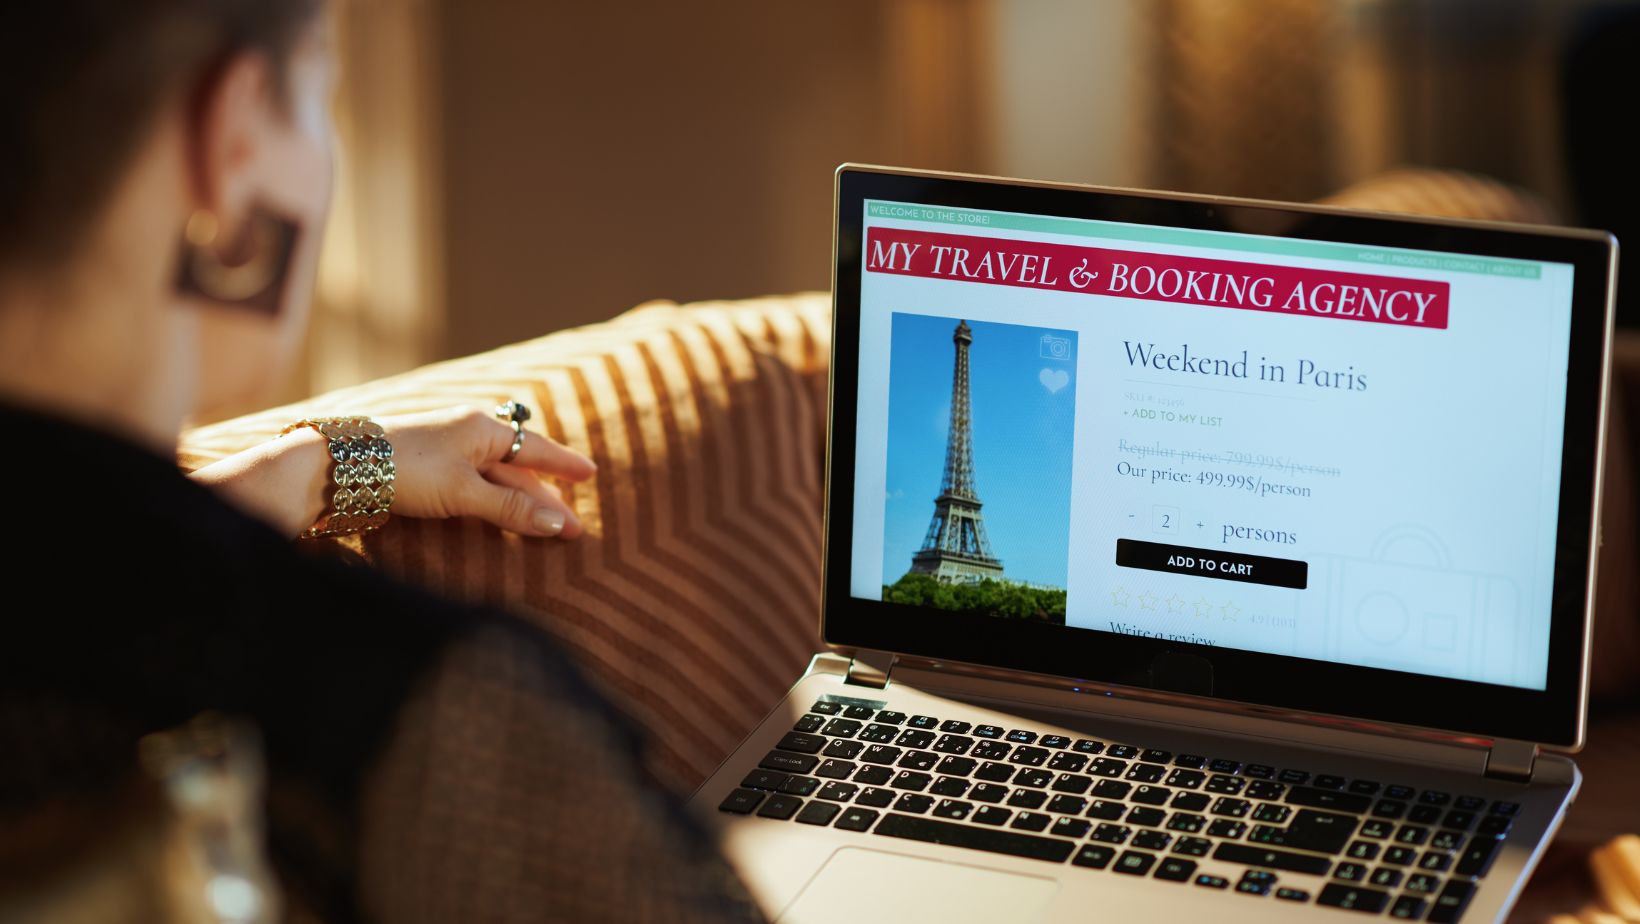 Online Booking Sites Lose Ground to Traditional Travel Agents